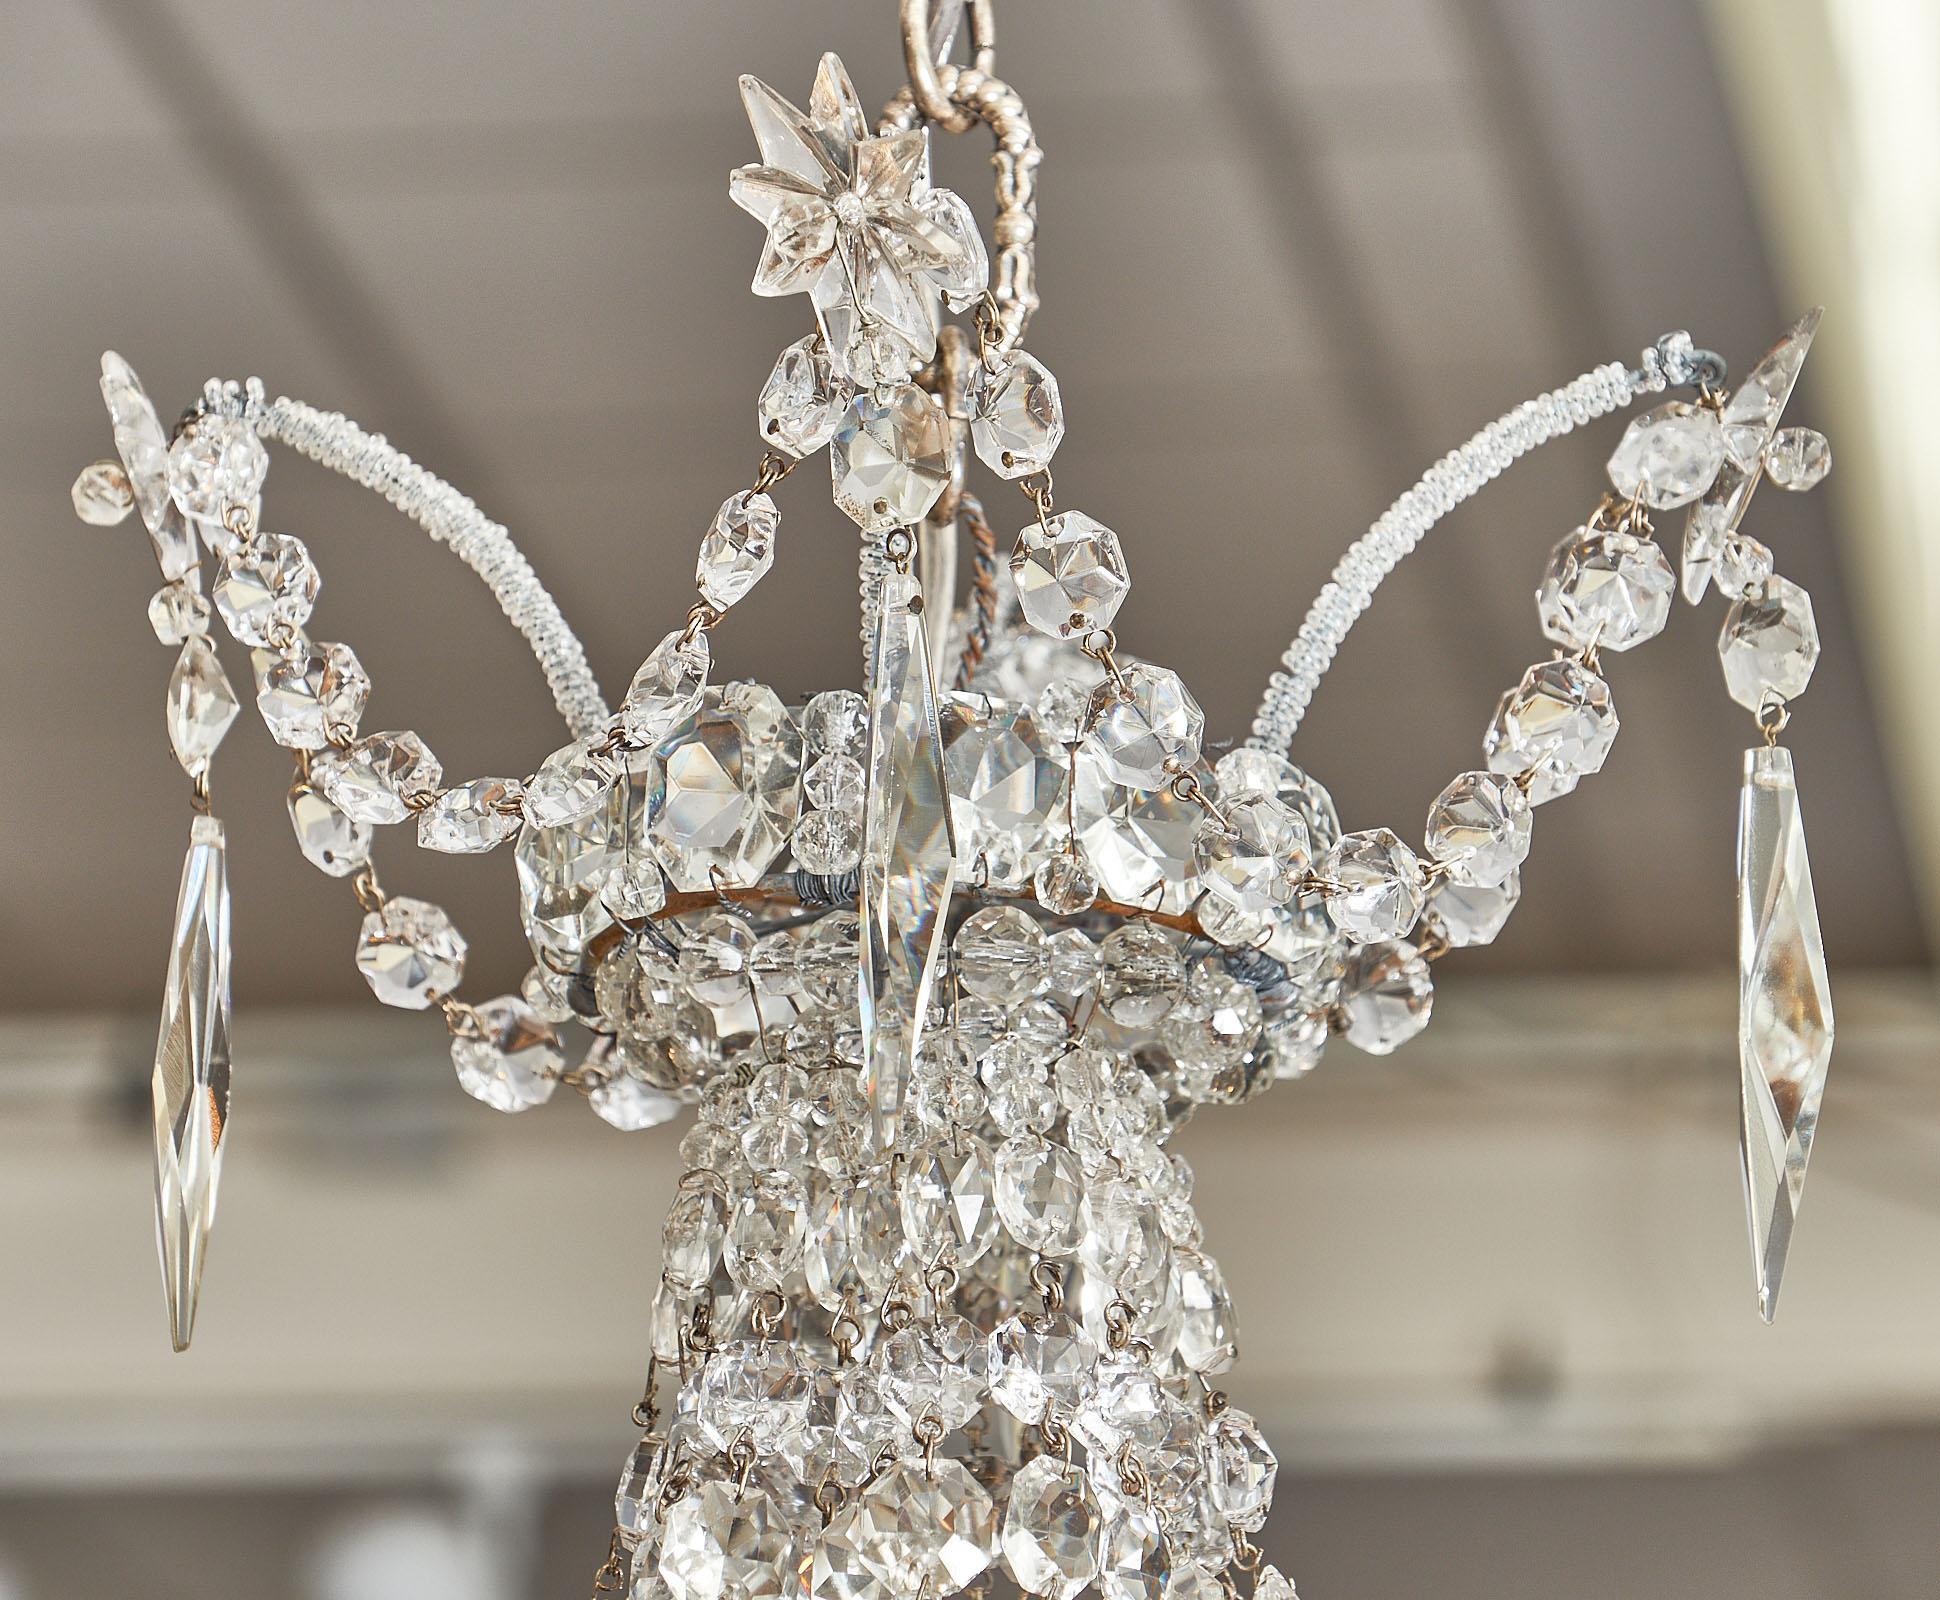 Empire Style French crystal chandelier with four bobeche and one central candelabra light within the crystals. We love the glamour of this piece purchased from Nice, France. There is also a sliver plated canopy. This vintage chandelier has been